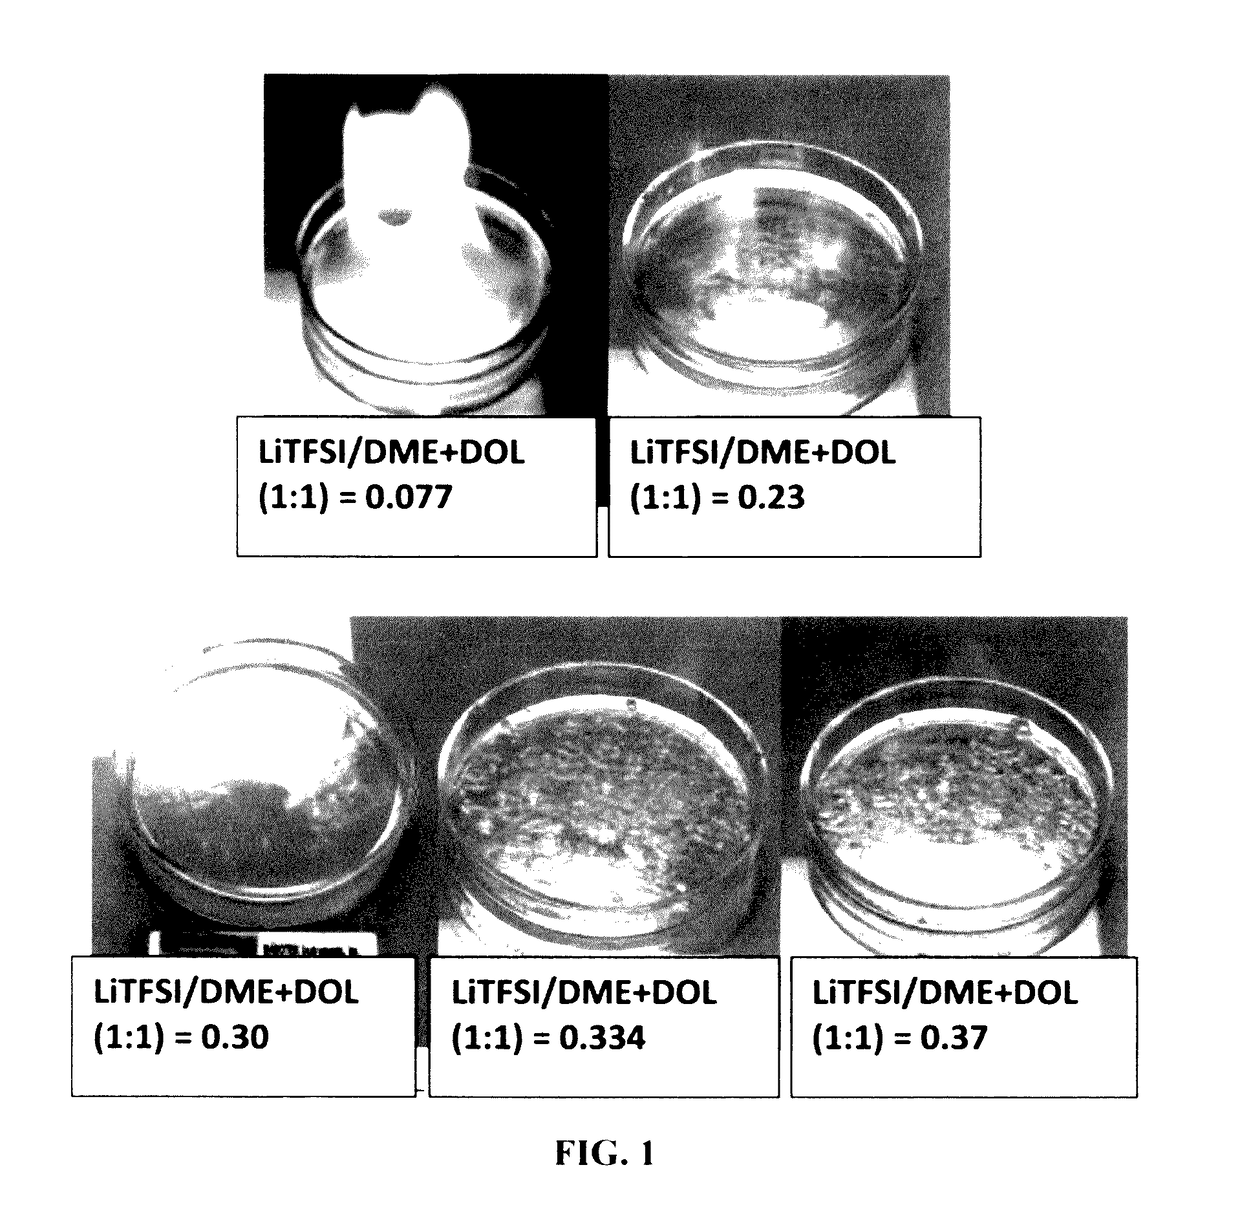 Process for producing non-flammable quasi-solid electrolyte and electrolyte-separator for lithium battery applications